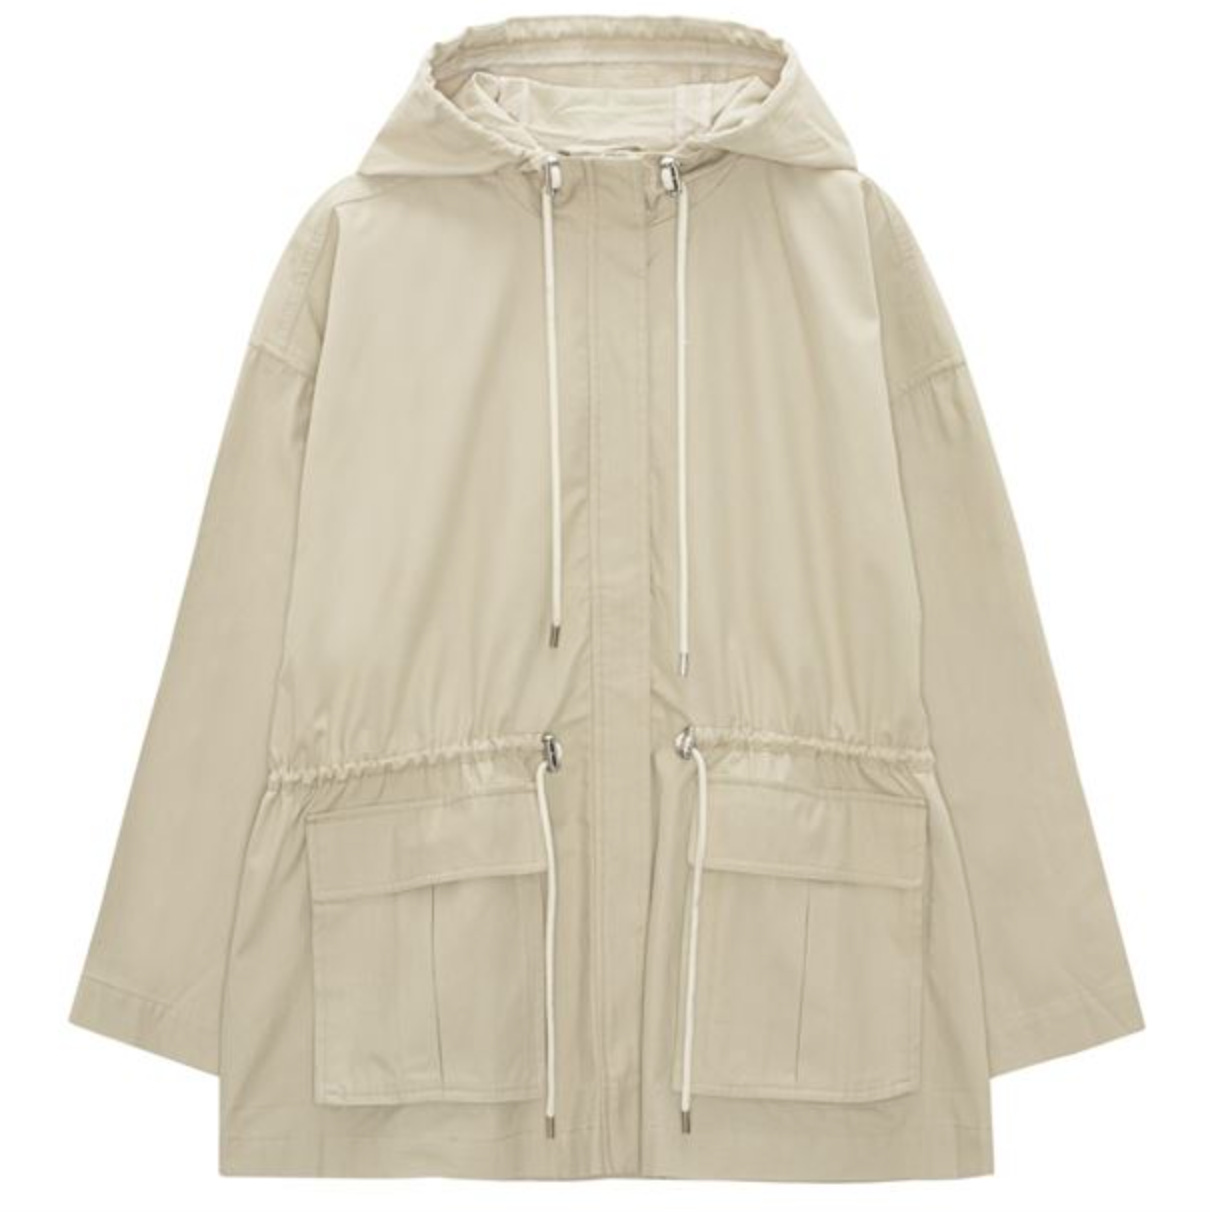 The best spring shell is a coat parka